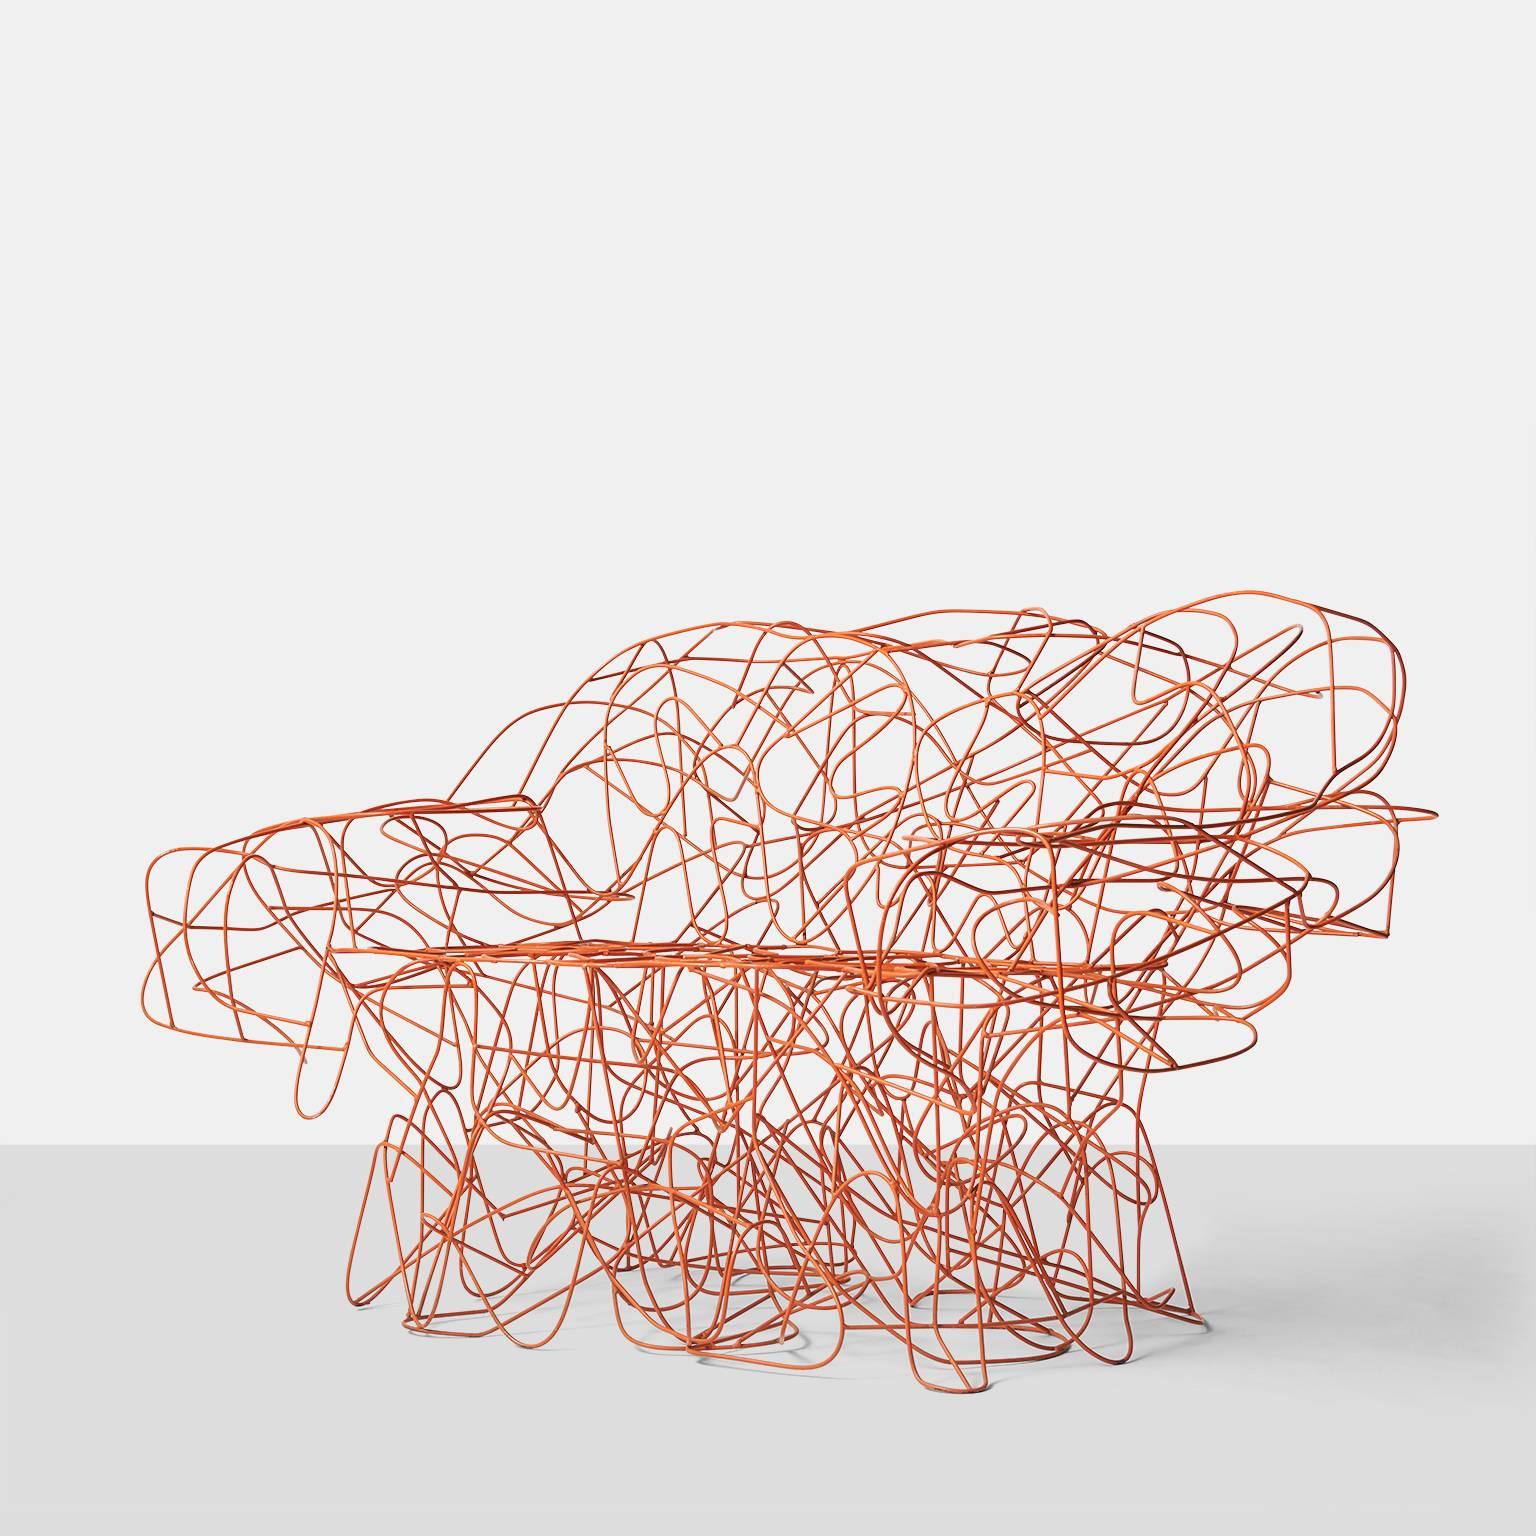 A sofa that is formed by the Campana Brothers from an irregular weave of stainless steel wire and painted with a coral color epoxy paint. Each piece of wire has been bent and soldered by hand and then smoothed to eliminate any sharp edges. The sofa